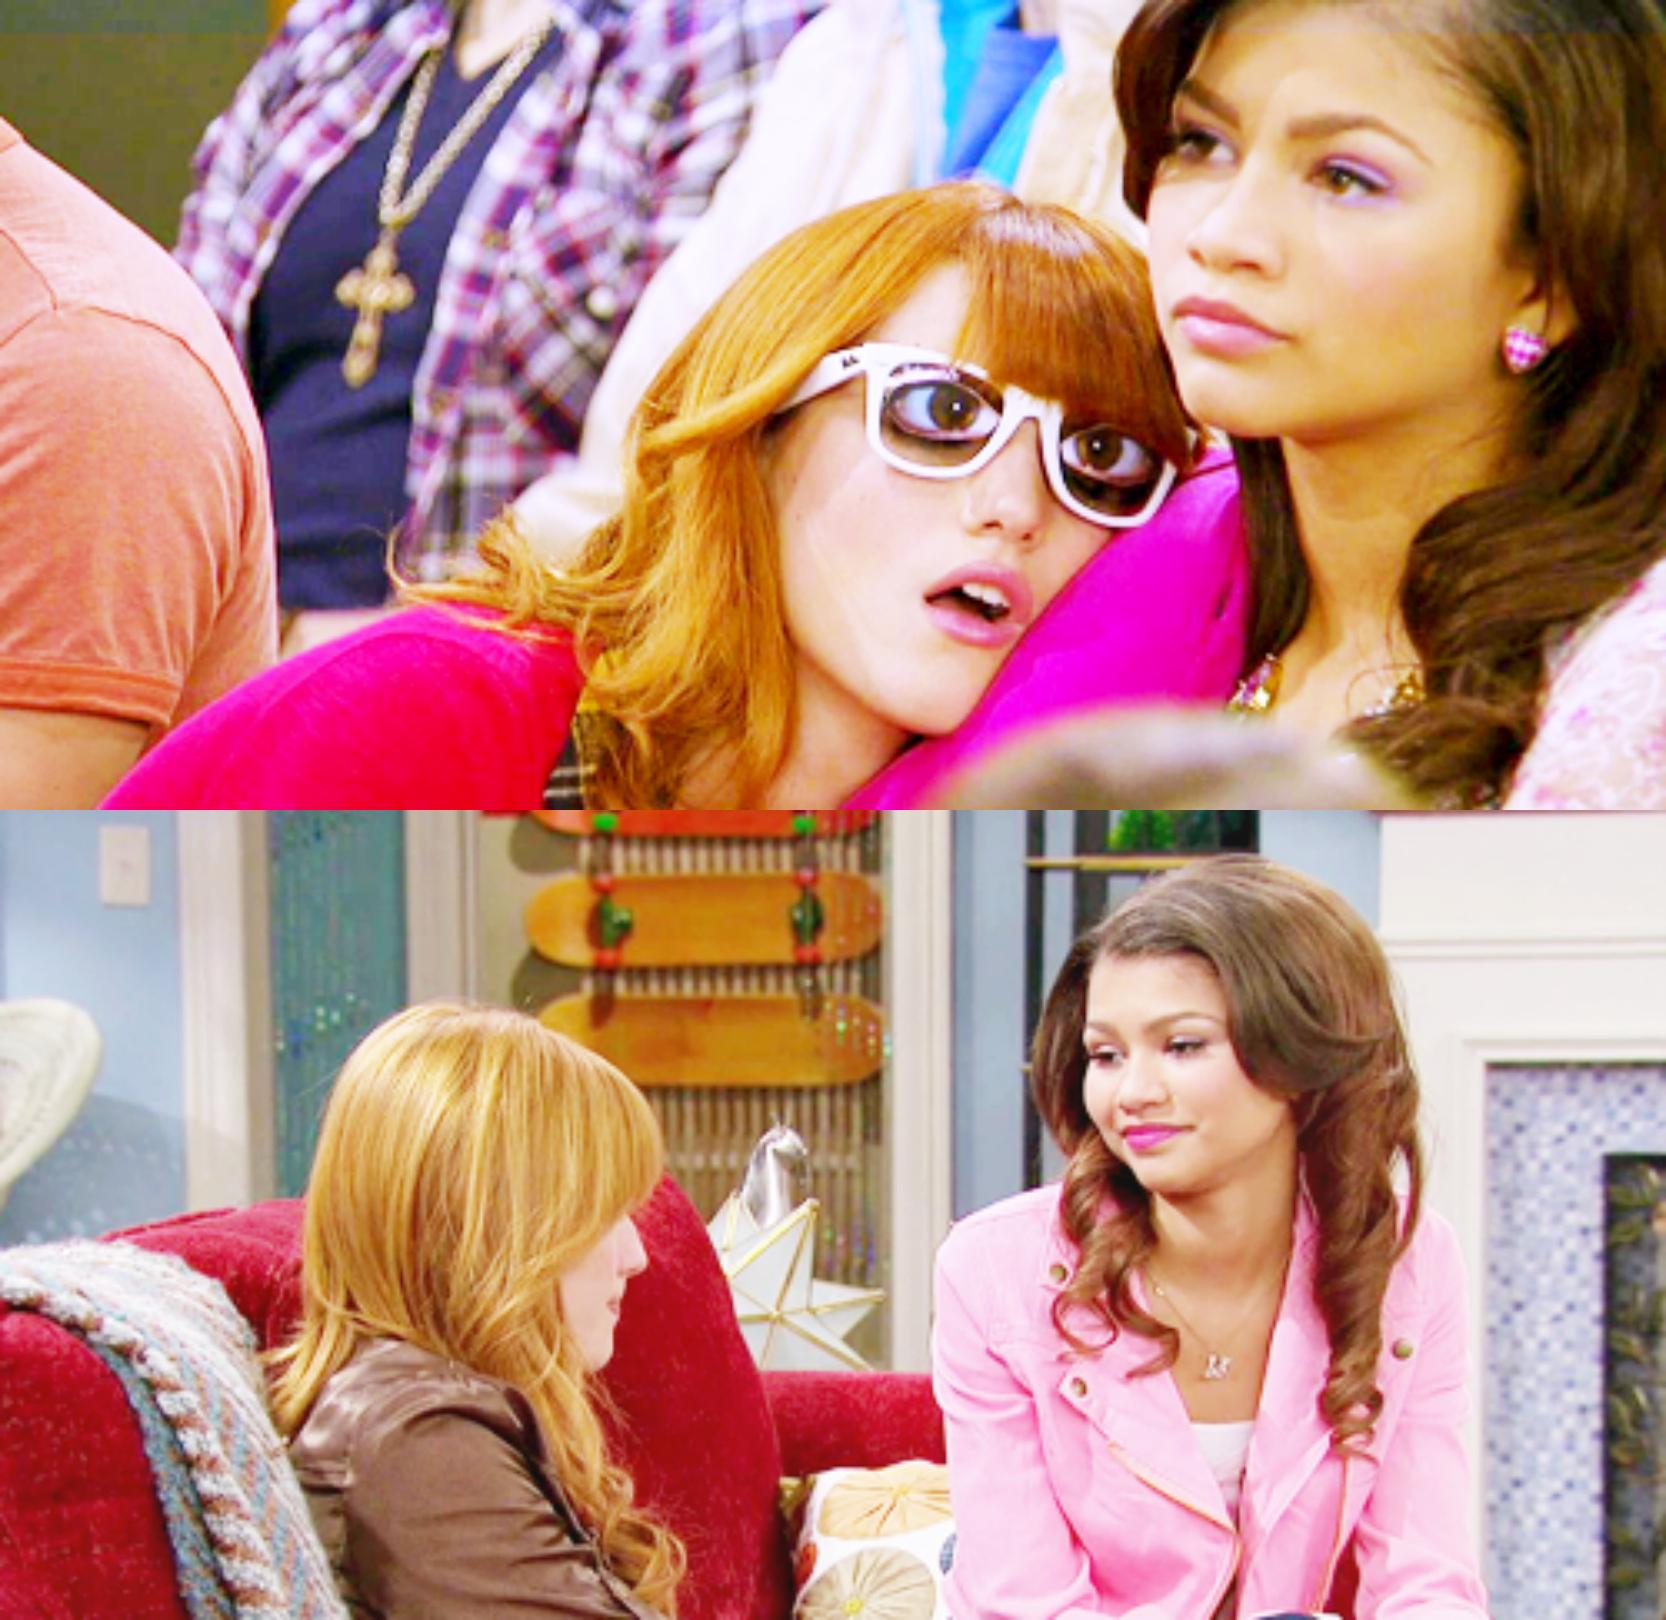 Bella Thorne in Shake It Up